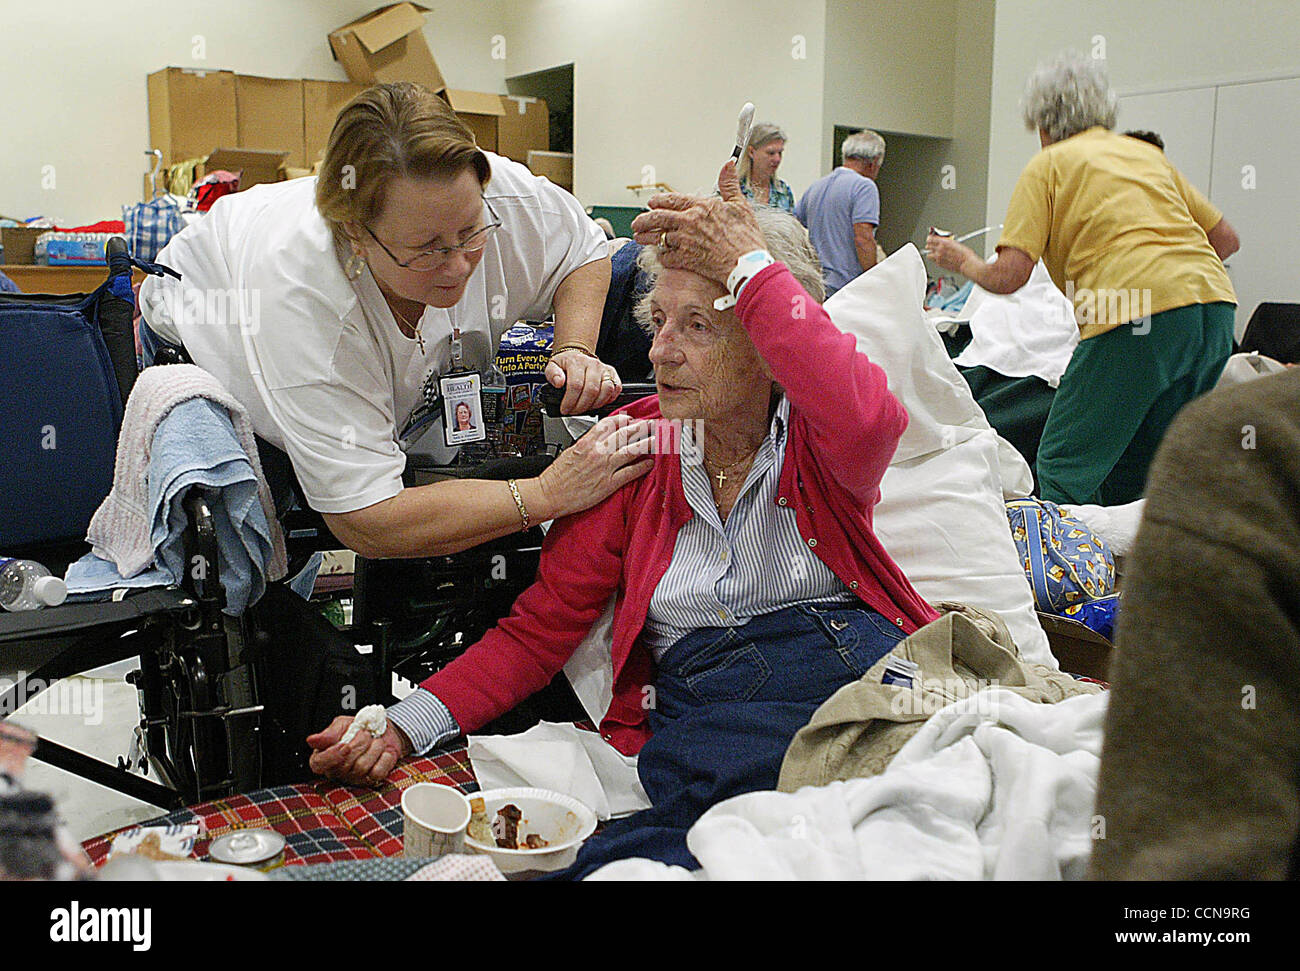 PORT ST LUCIE - Sally Palladino, a human services counselor, checks on Mary Laveck inside hurricane shelter set up at the Port St. Lucie Community Center.  Laveck, who has had both of her legs amputated (?sp?), has been in the shelter since Thursday with her husband Joseph.   Photo by Damon Higgins/ Stock Photo